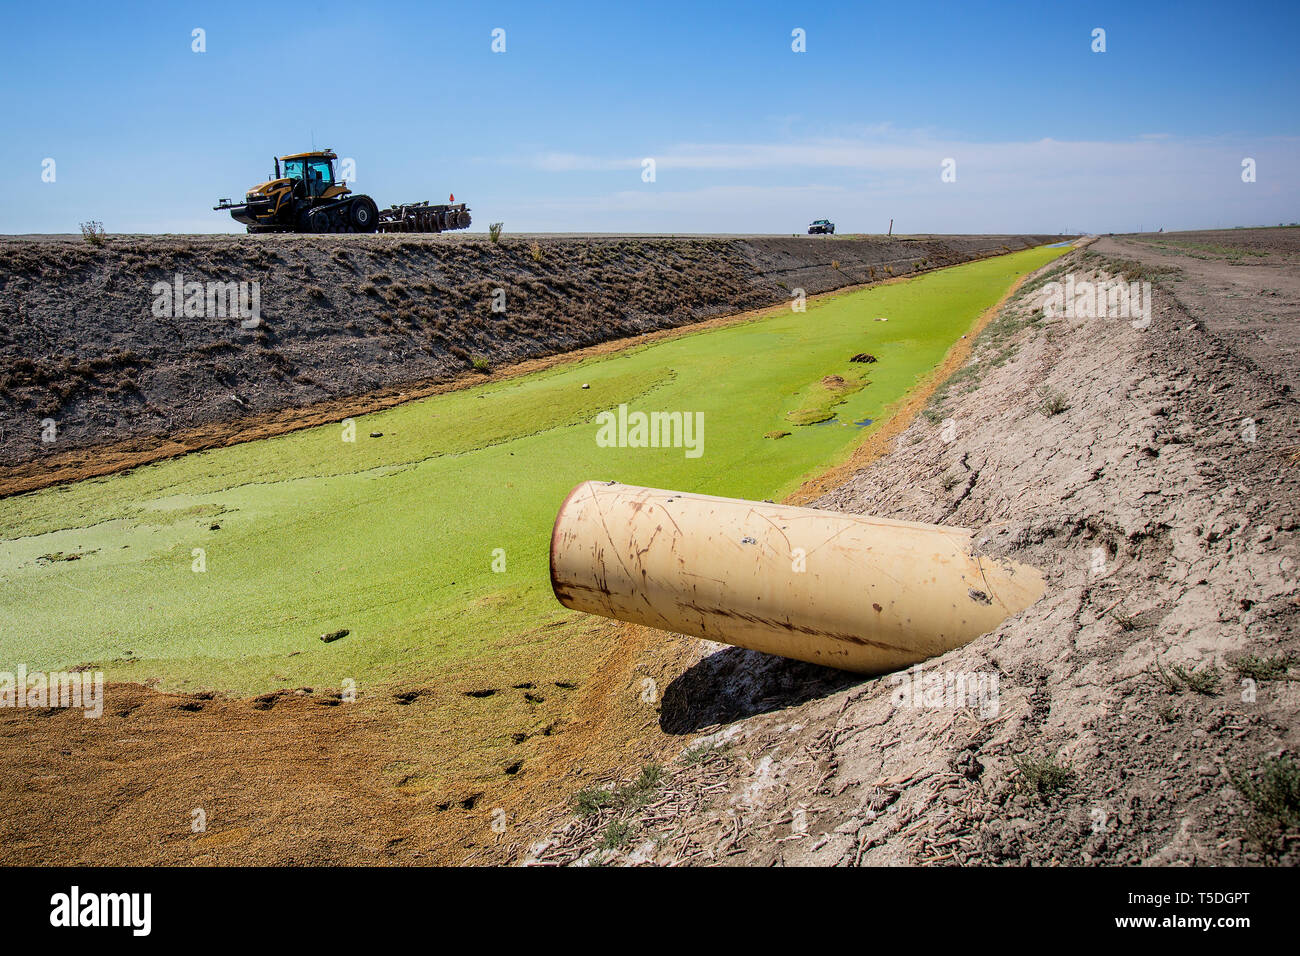 Irrigation system in a farm field in Pixley.  Although requiring lots of water, leveled farm fields and modern irrigation systems limit the waste.  In general, vegetable farming requires only a fraction of the water that is needed for livestock farming. Stock Photo